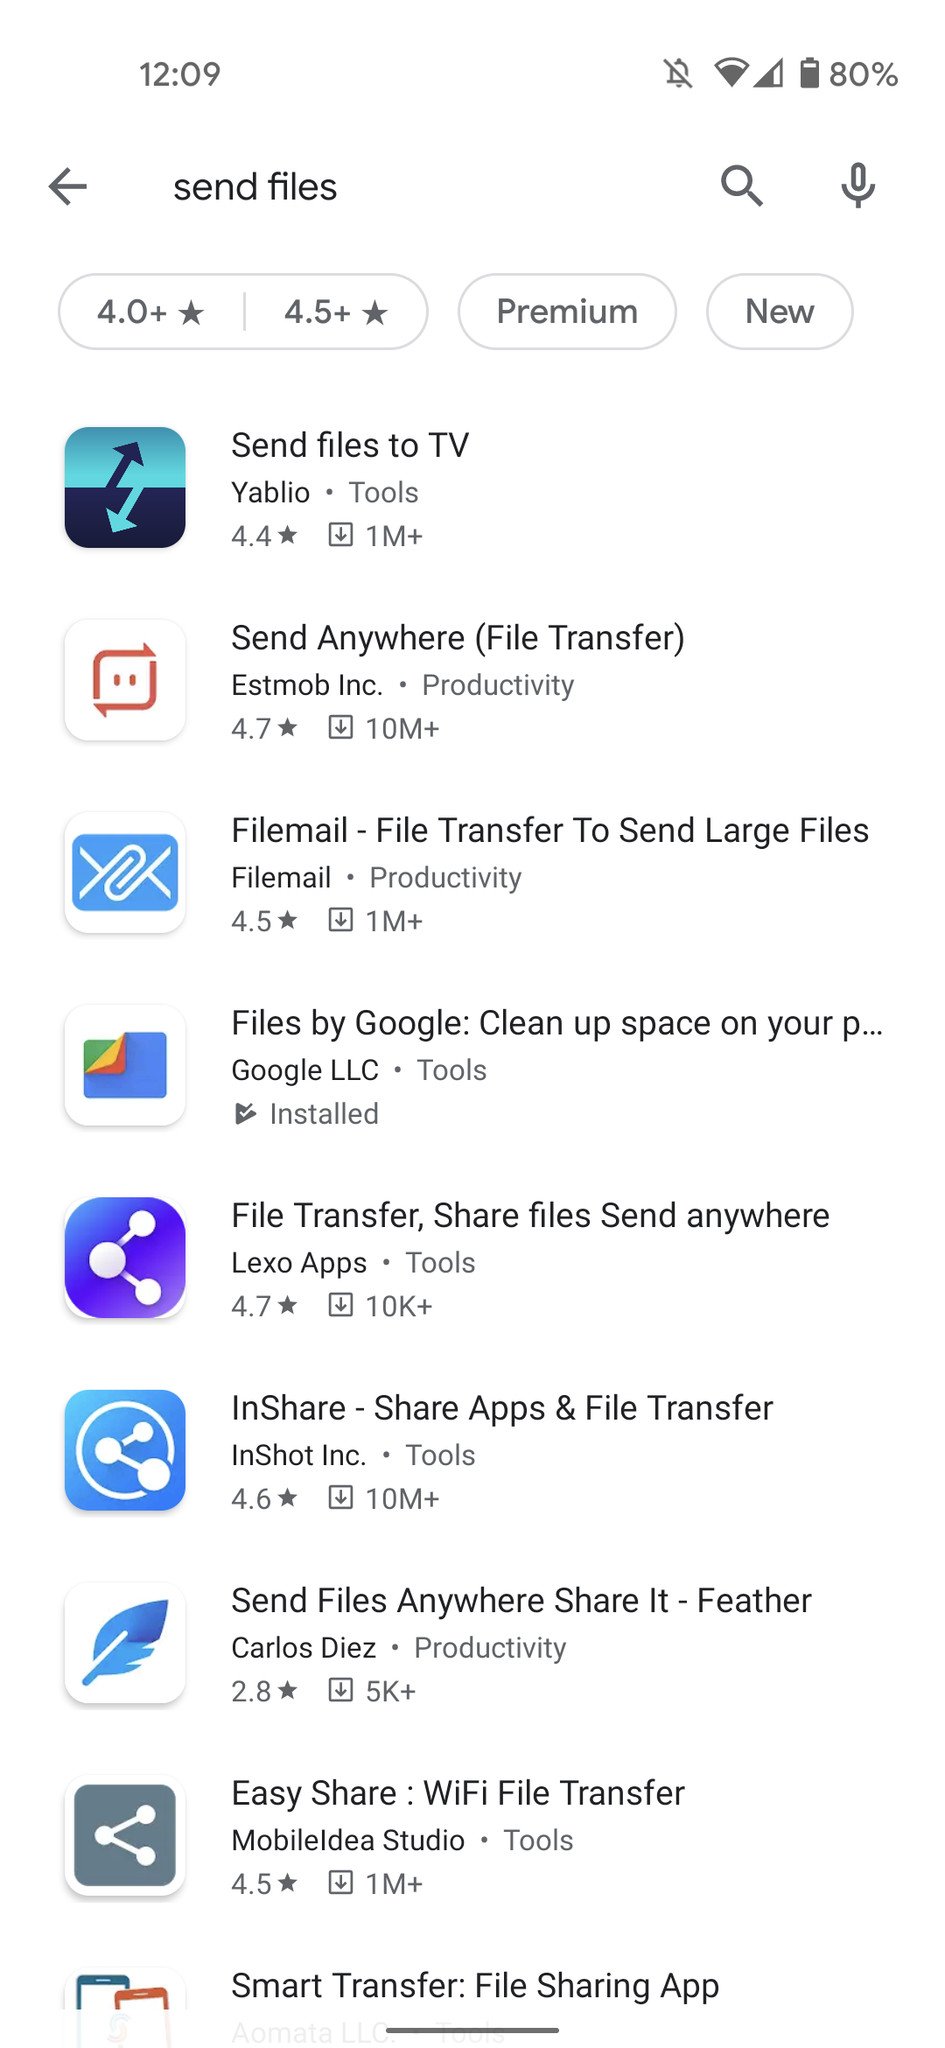 Send Files to TV app in the Play Store